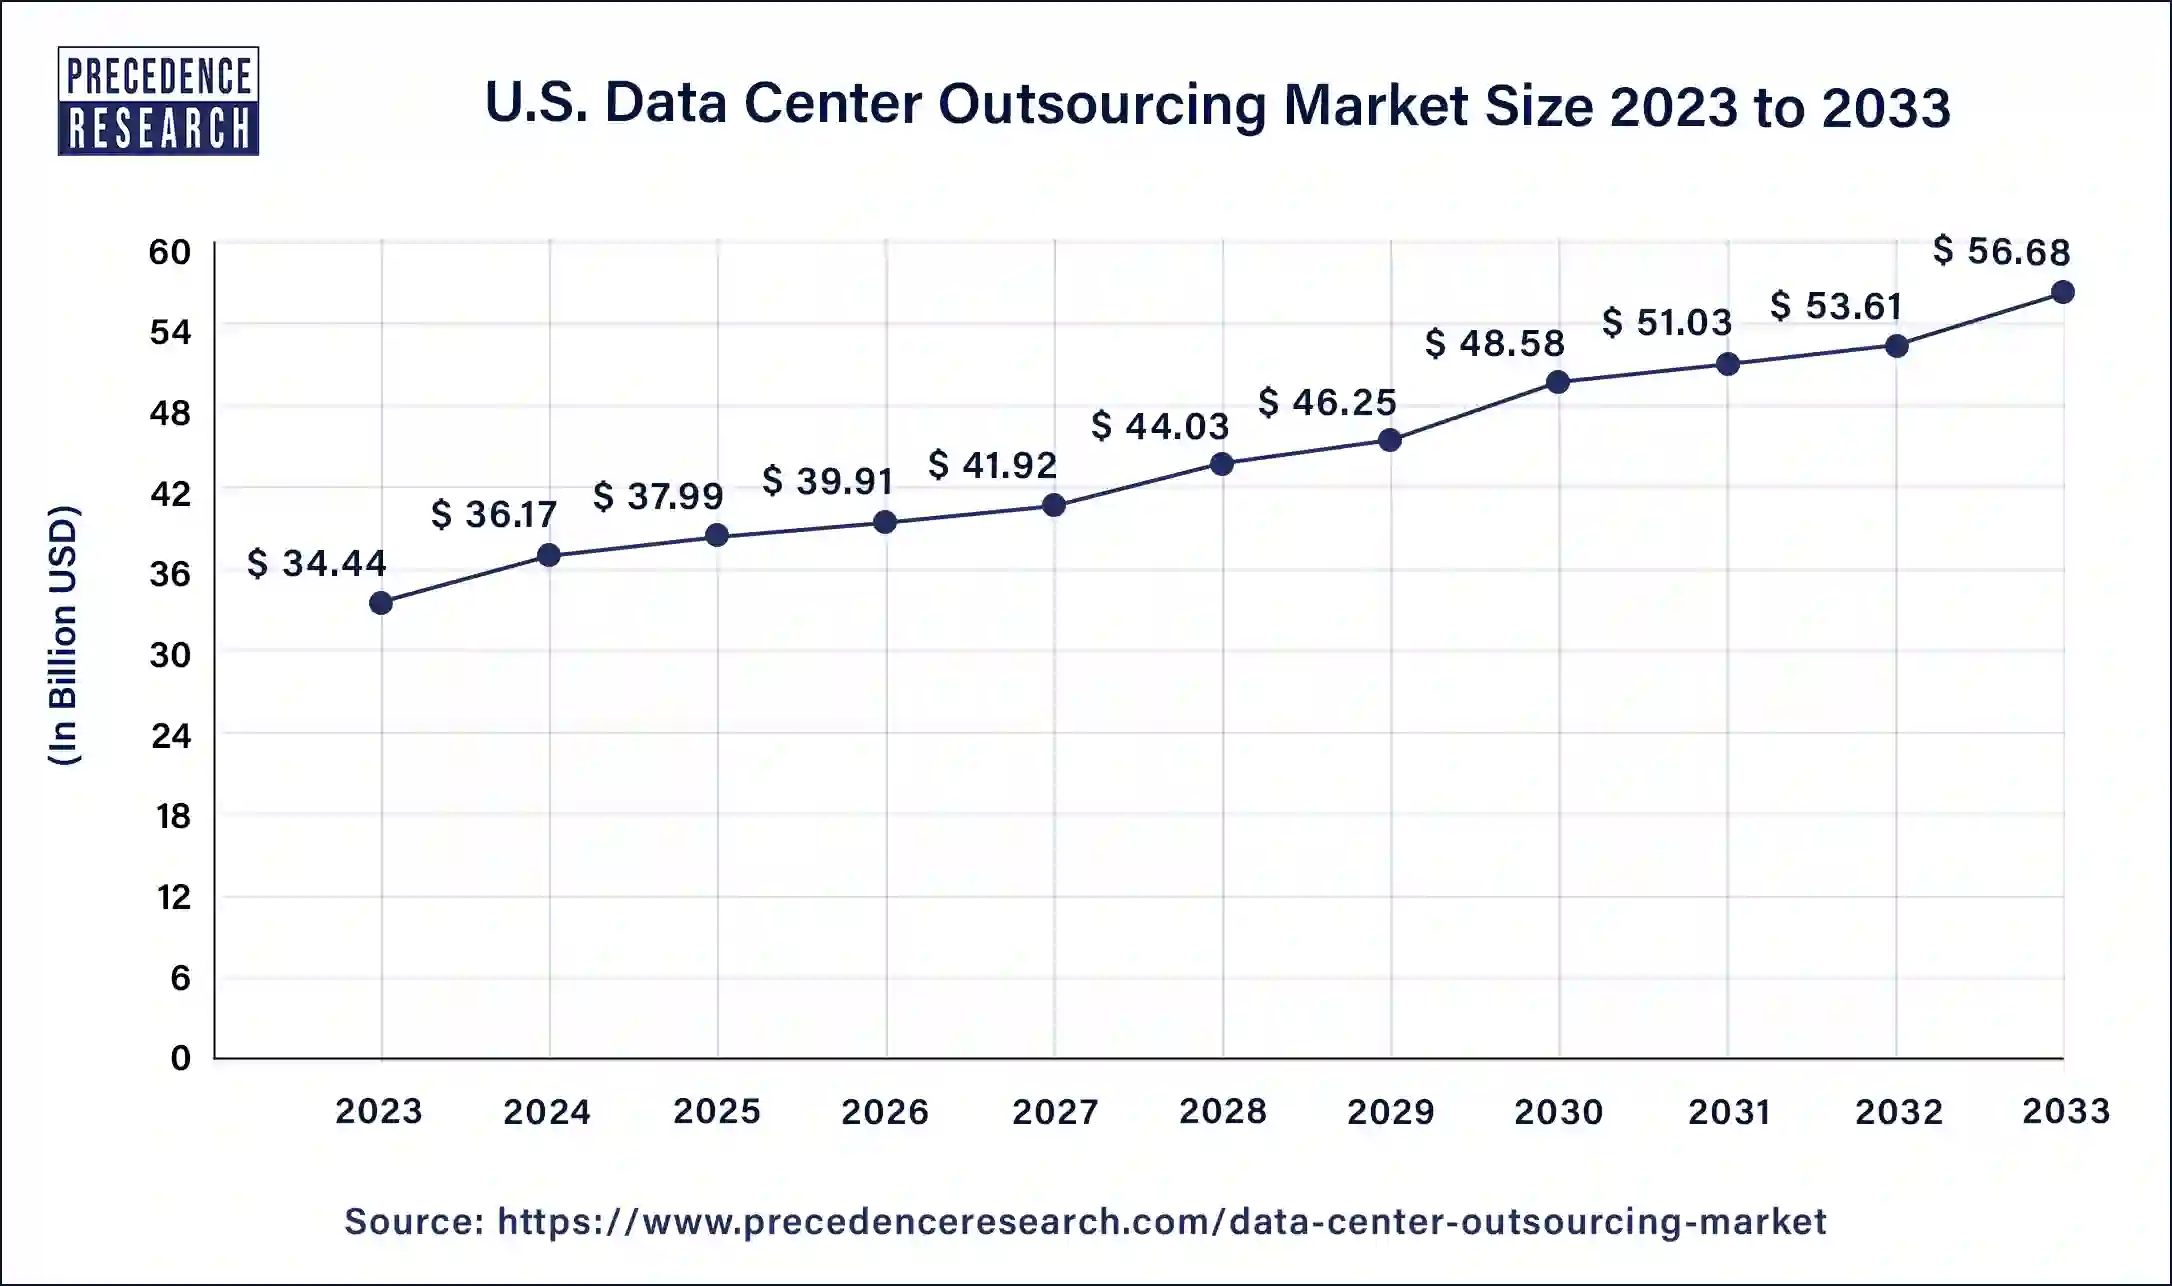 U.S. Data Center Outsourcing Market Size 2024 to 2033